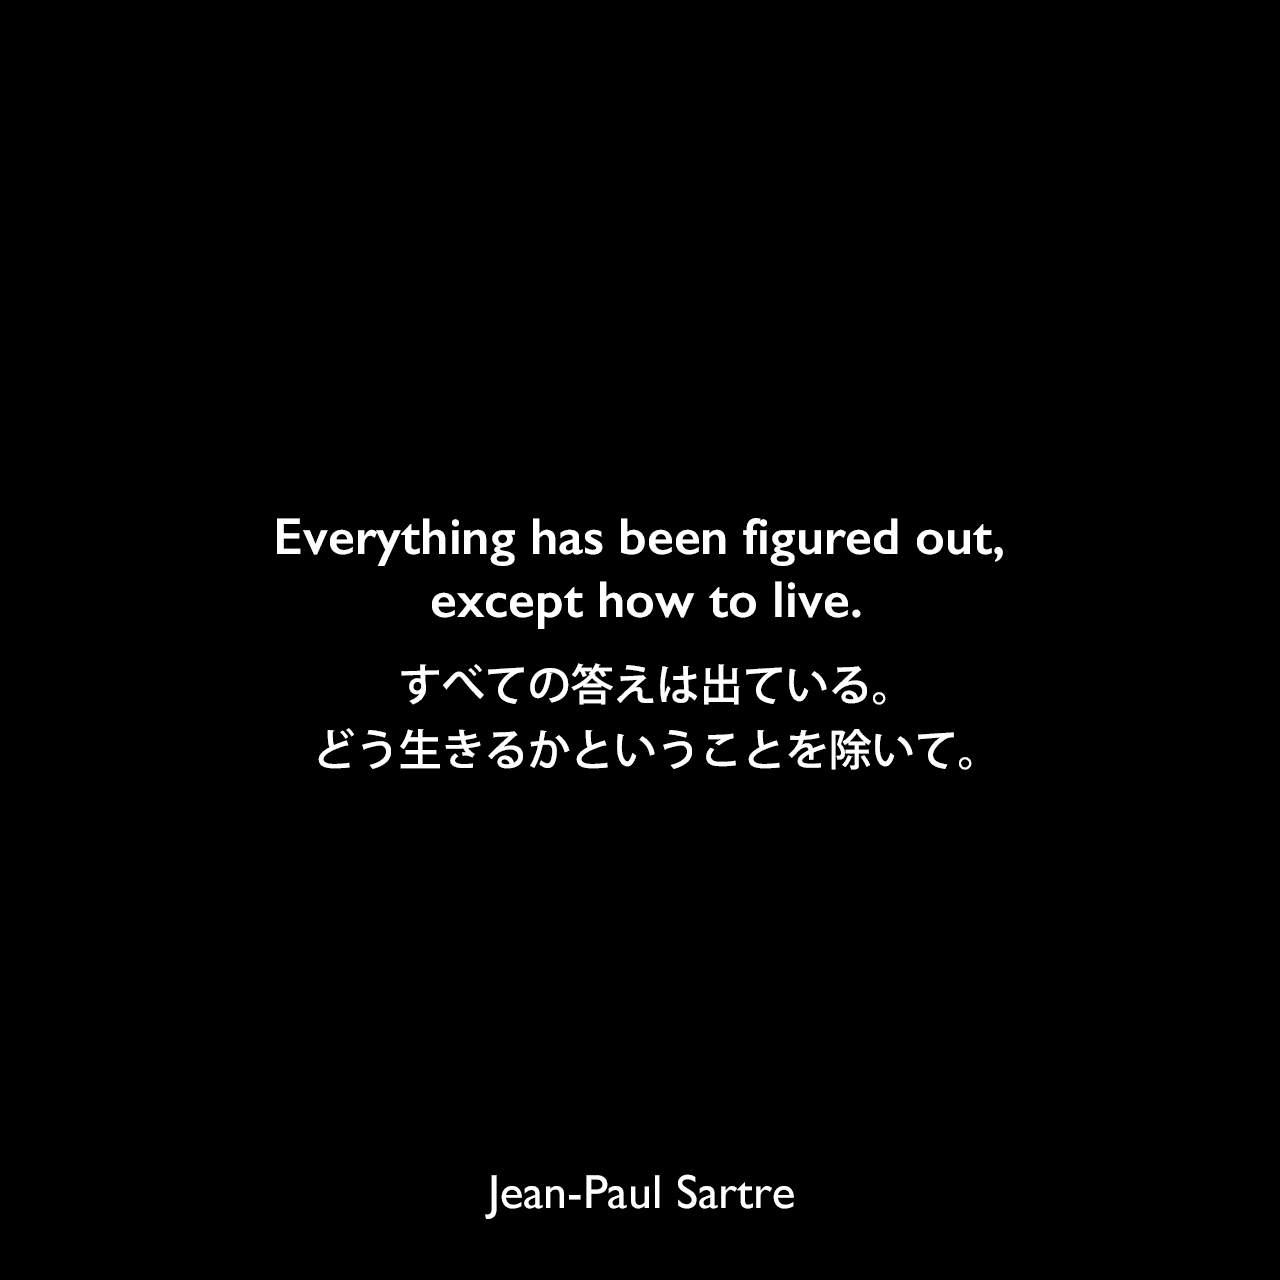 Everything has been figured out, except how to live.すべての答えは出ている。どう生きるかということを除いて。